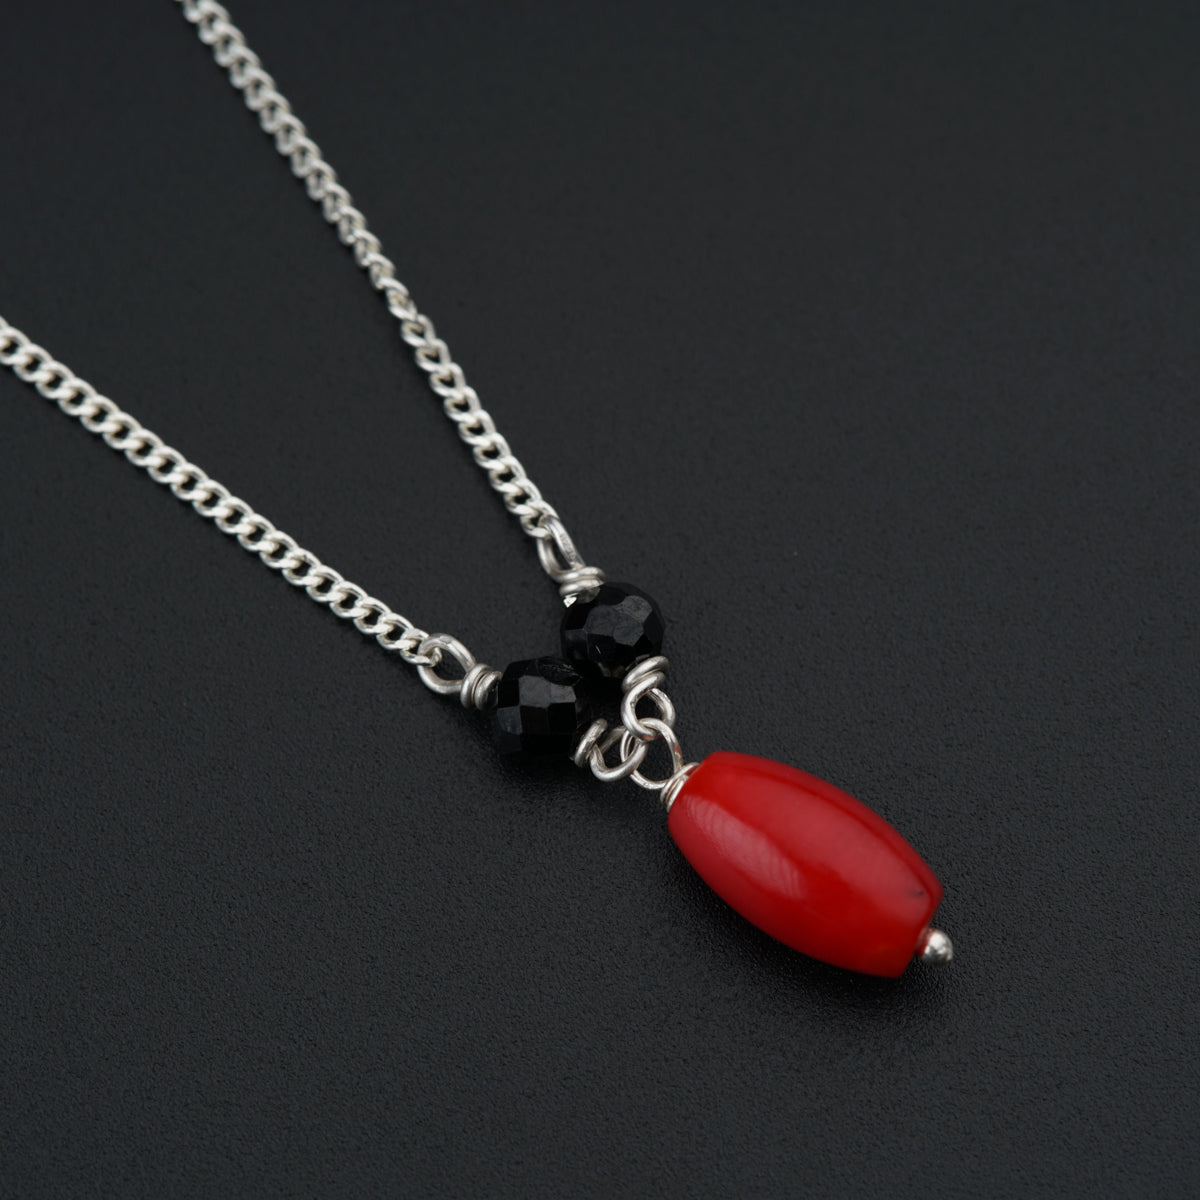 Handmade Silver Mangalsutra with Coral